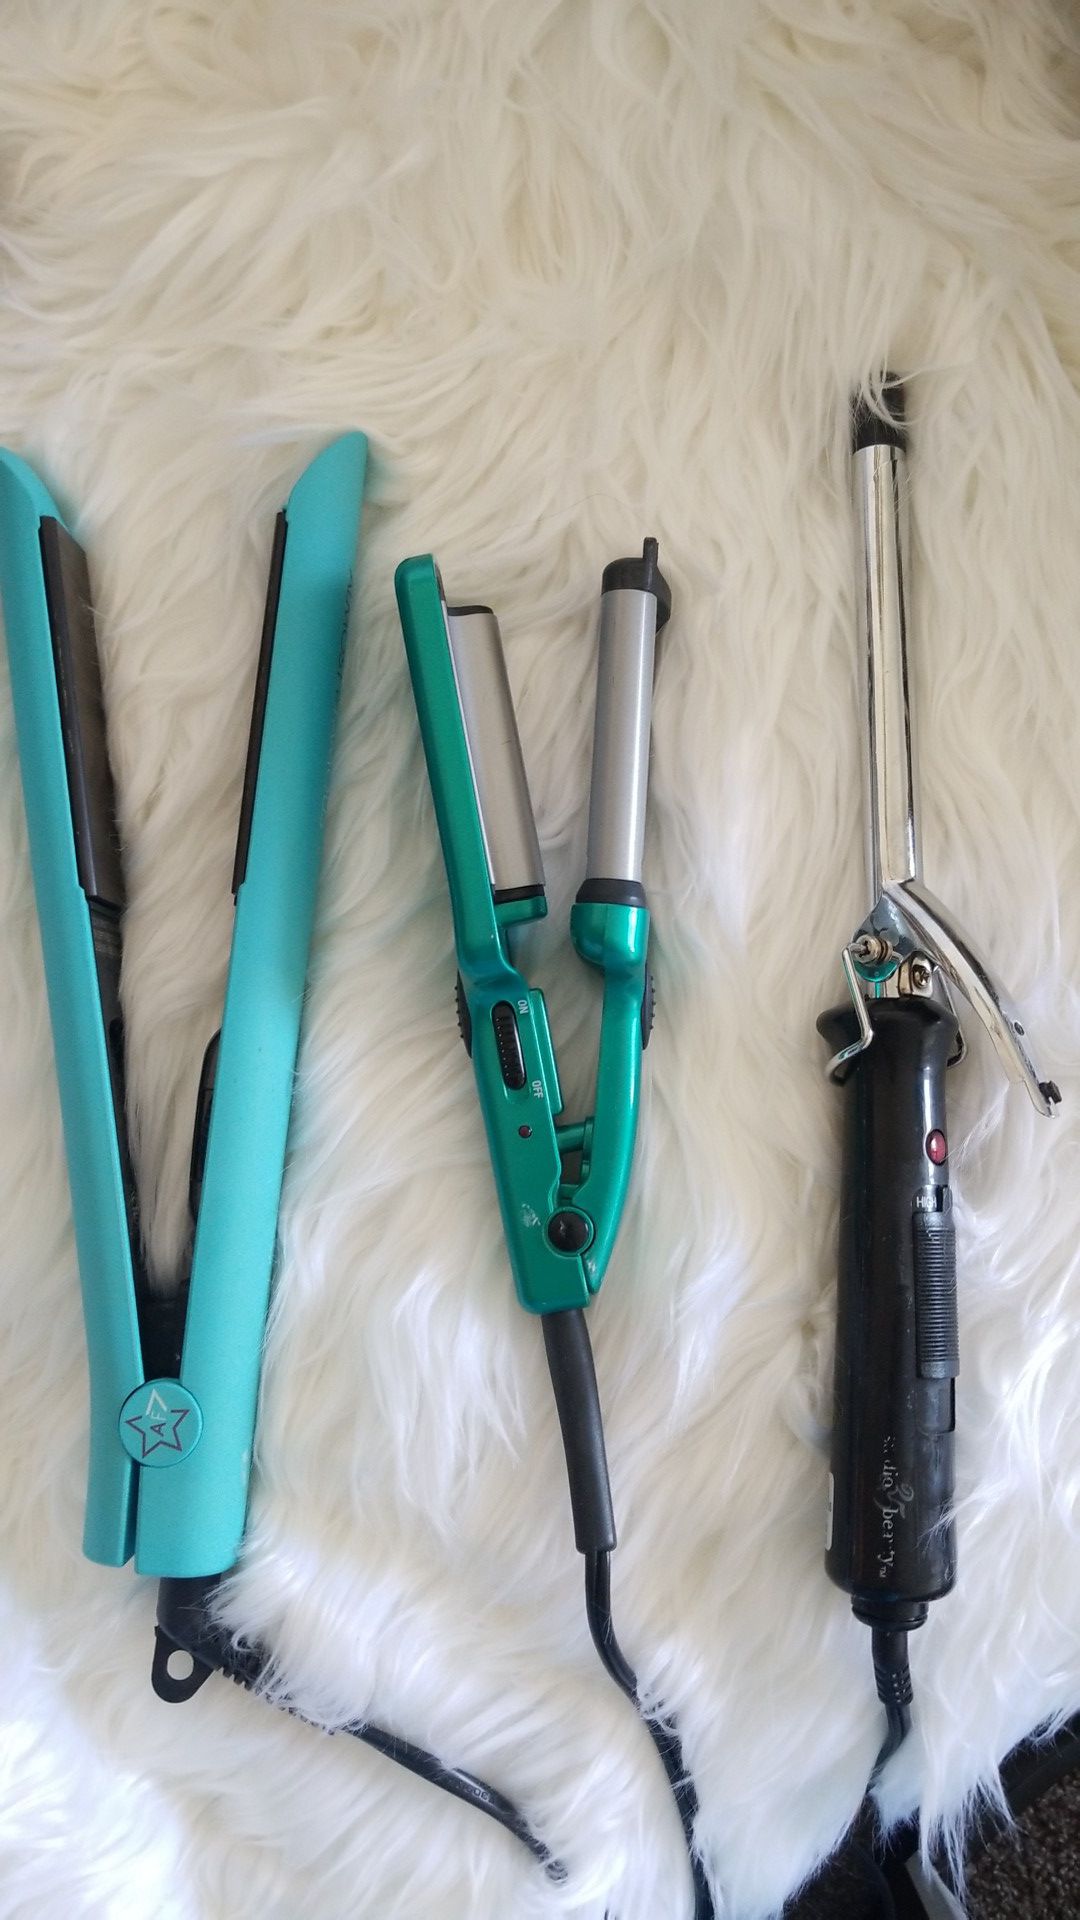 Hair straightener and curler